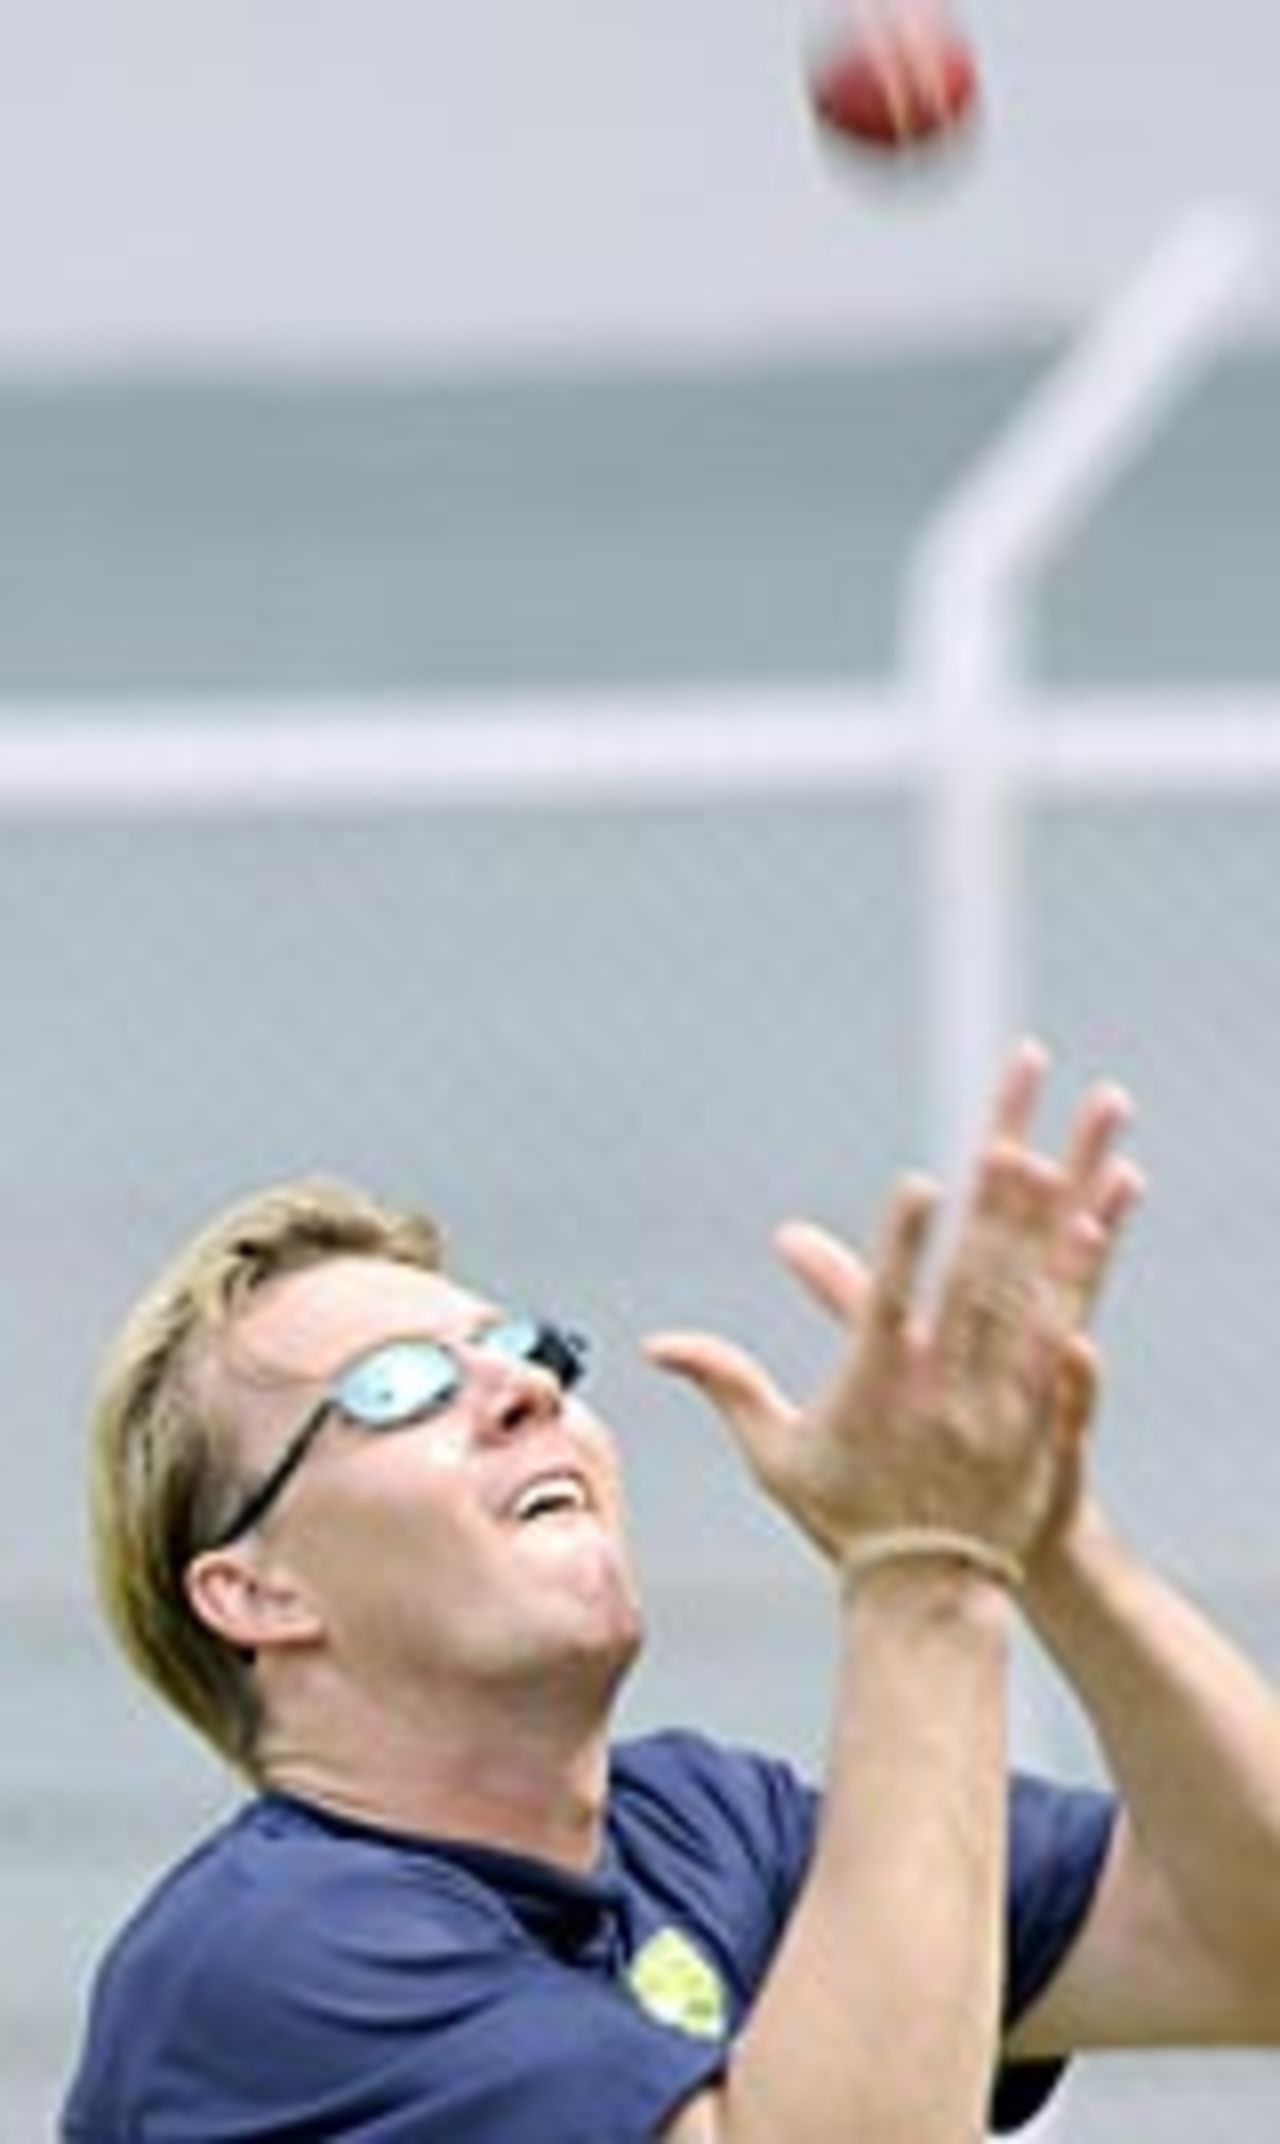 Concentration from Brett Lee as the Australians unwind in Mumbai, September 27, 204